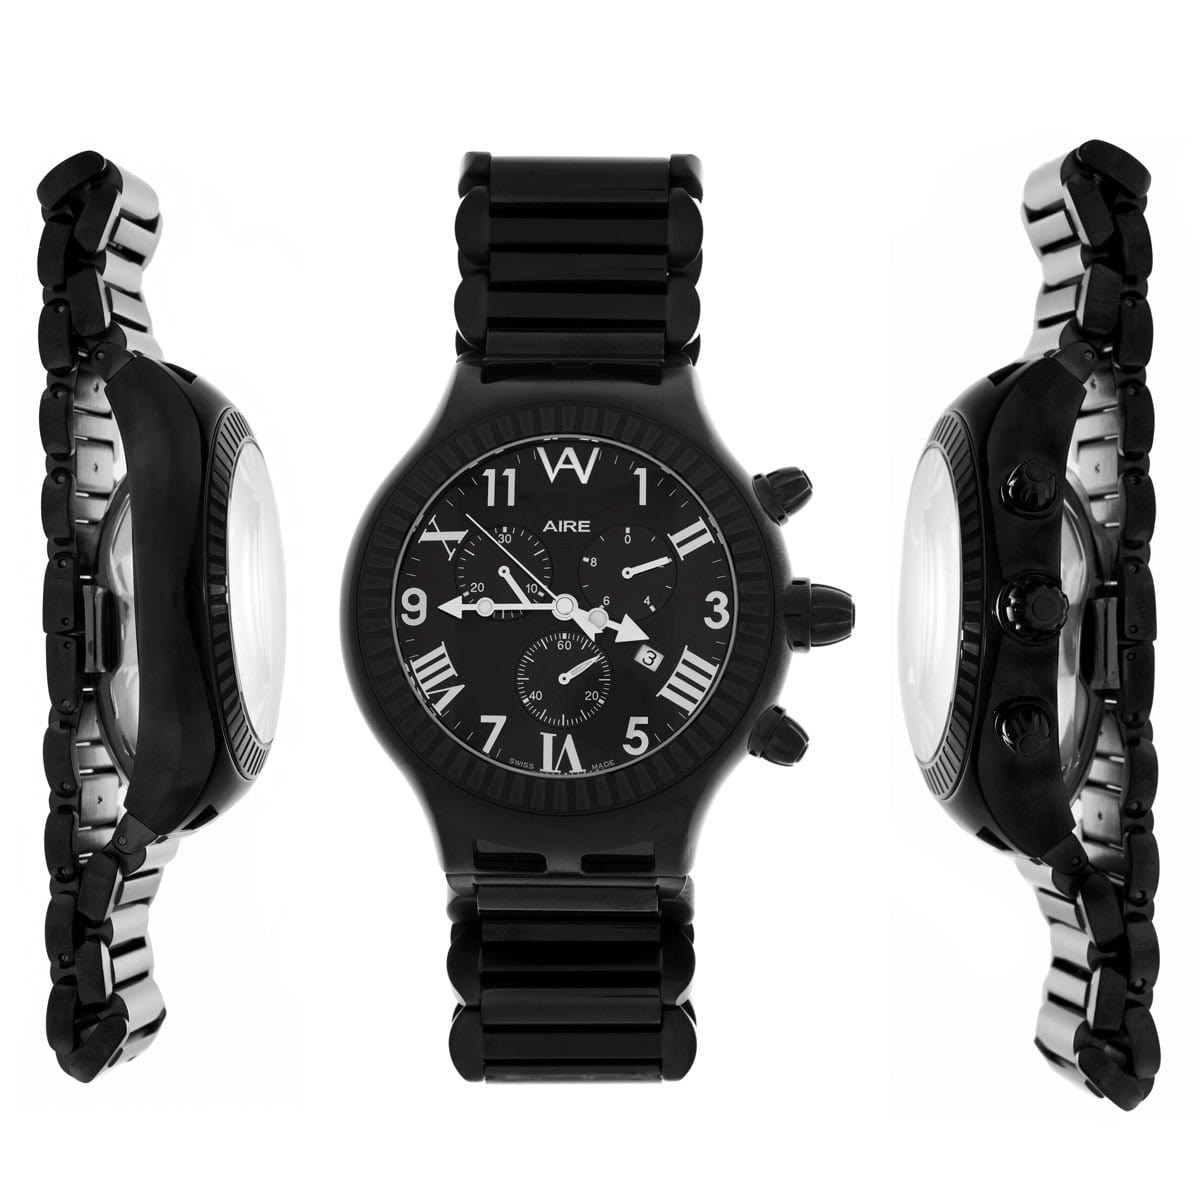 PARLAY BLACK WATCH - Chris Aire Fine Jewelry & Timepieces